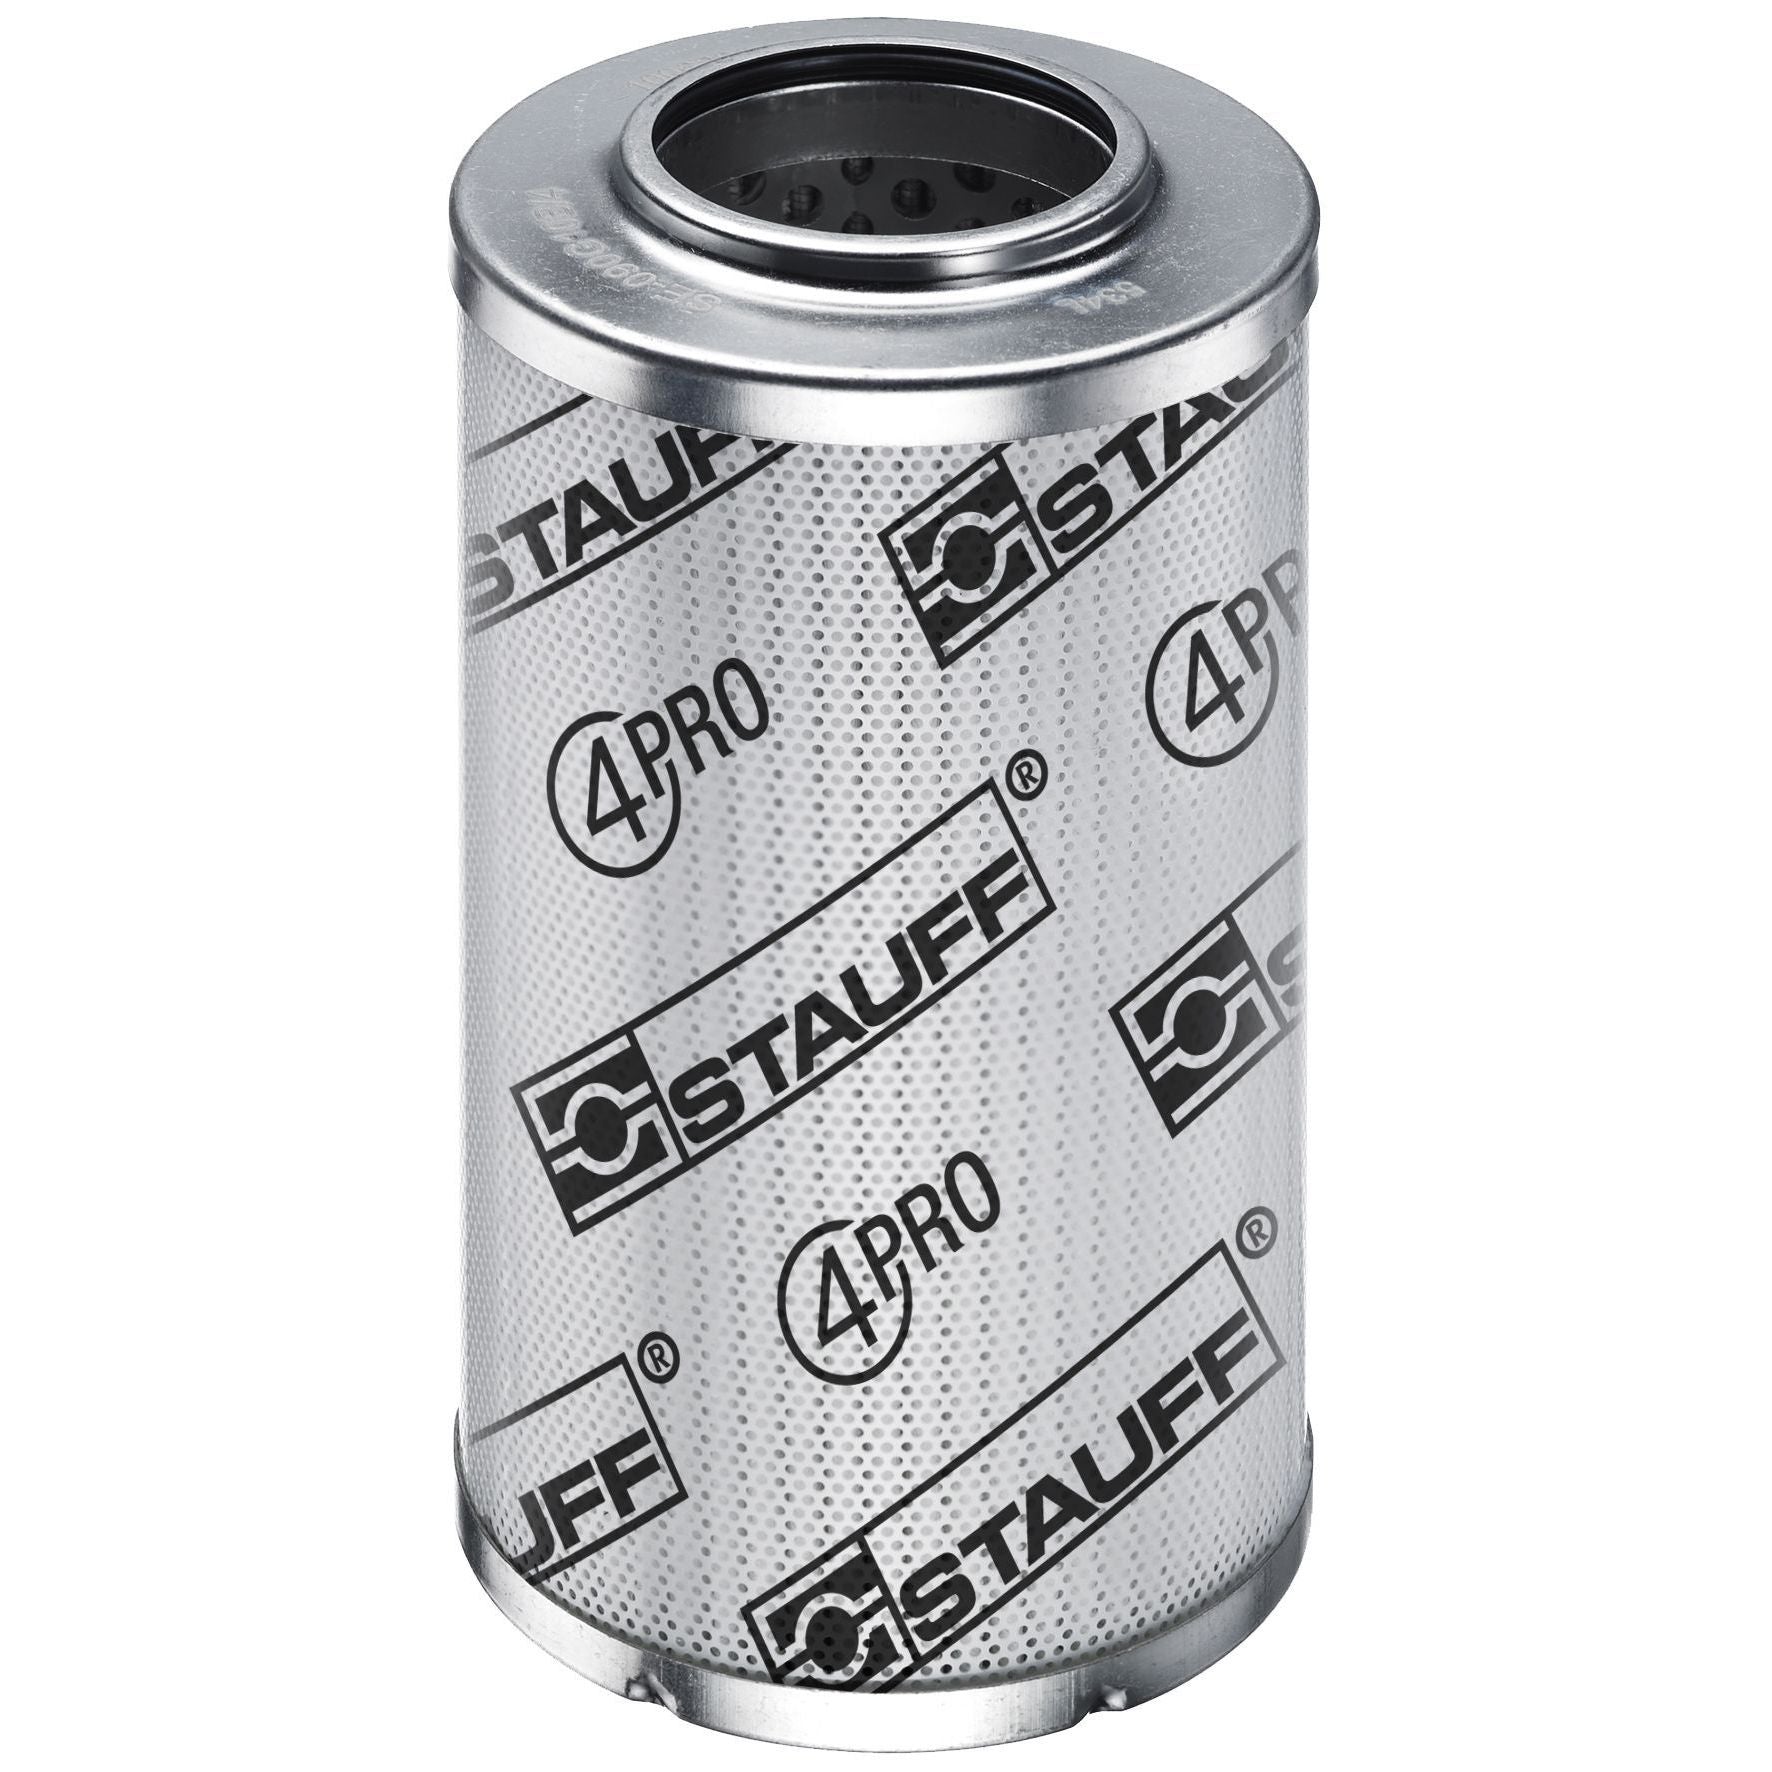 SE-030-H-05-V/4 : Stauff SF-030 Series Filter Element, 5 Micron, Synthetic, 3045psi Collapse Differential, Viton Seals